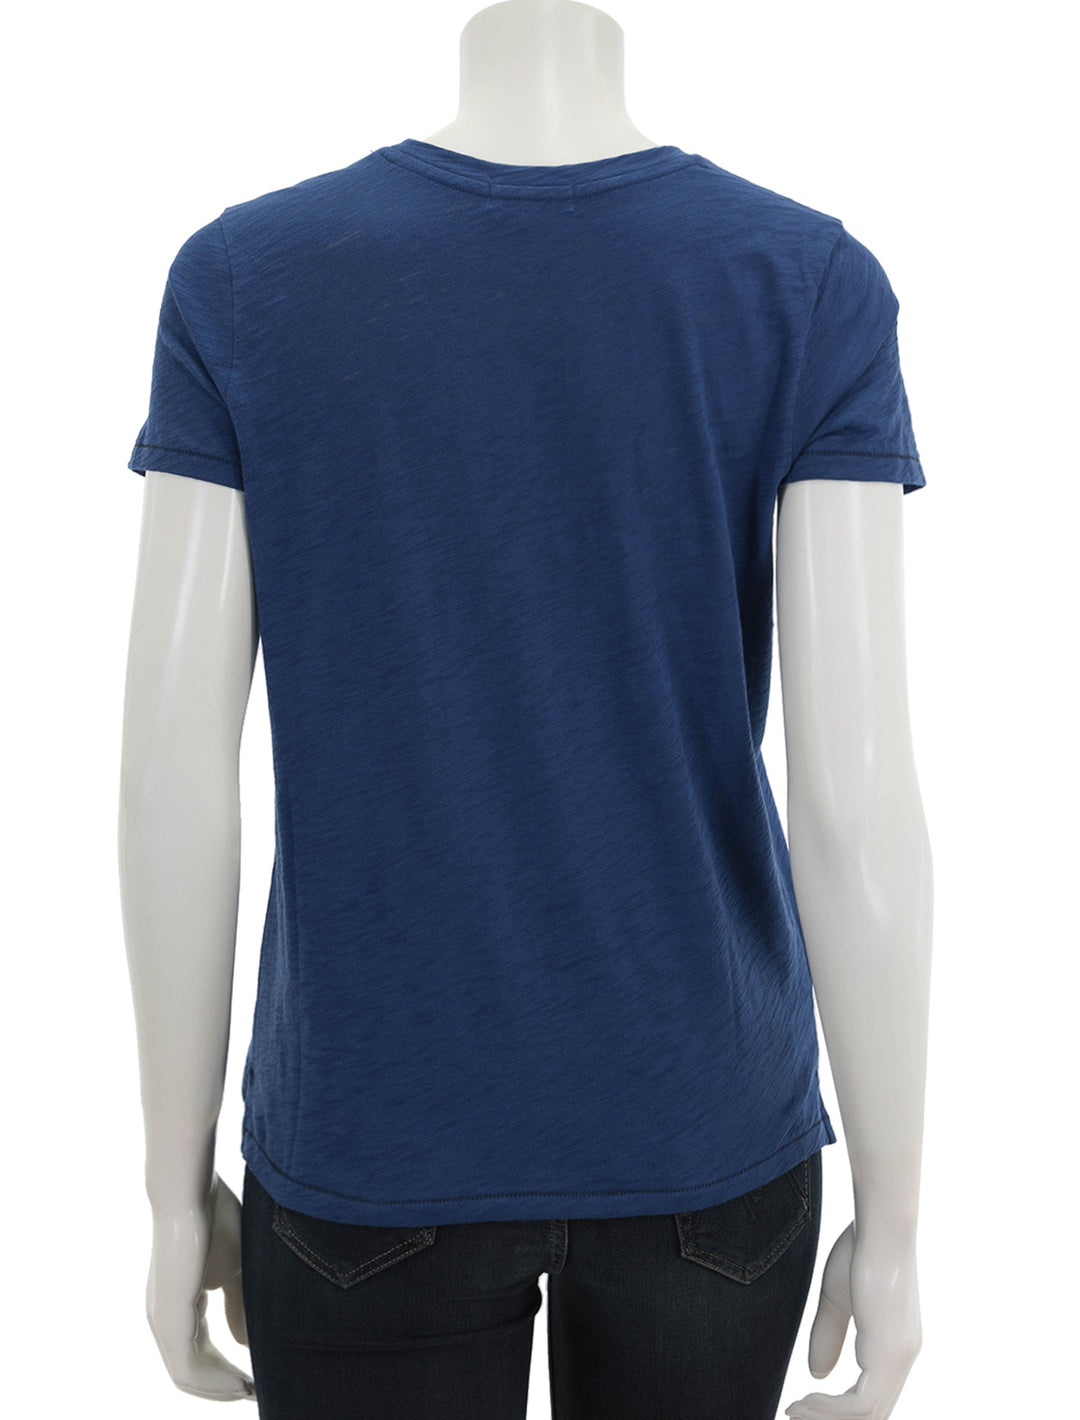 Back view of Goldie Lewinter's short sleeve contrast stitch boy tee in navy peony/black.